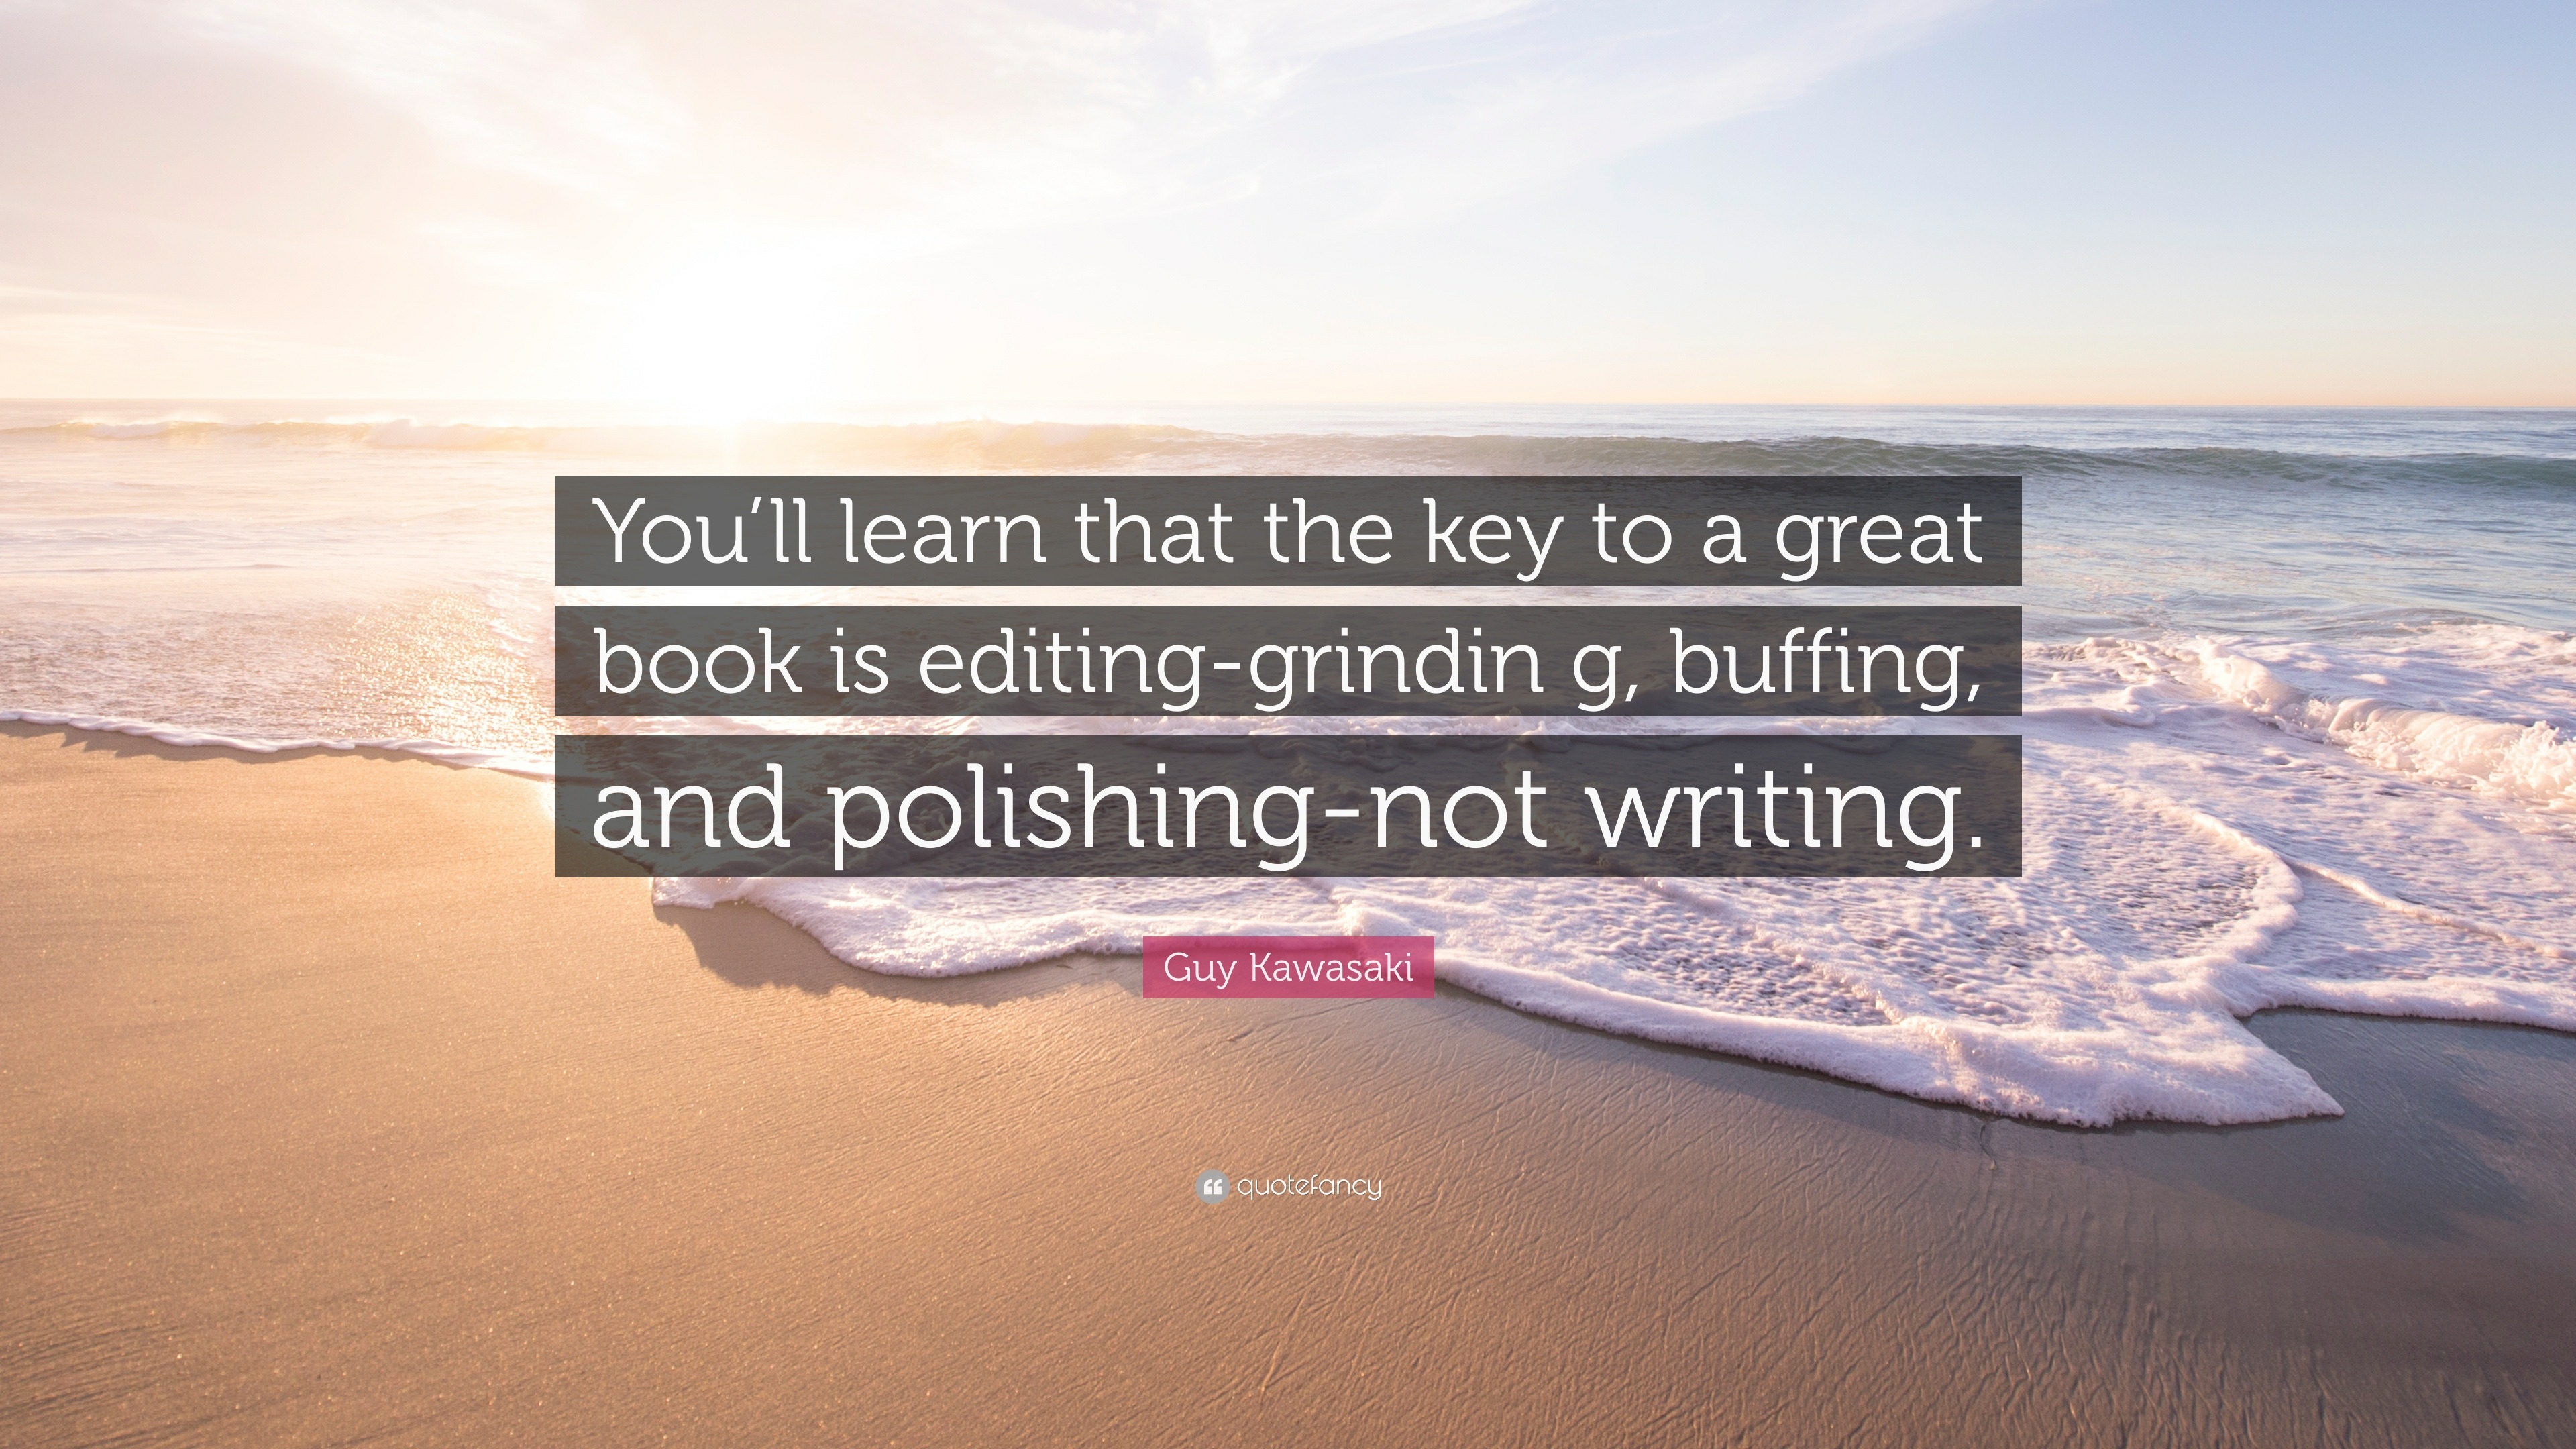 https://quotefancy.com/media/wallpaper/3840x2160/1983107-Guy-Kawasaki-Quote-You-ll-learn-that-the-key-to-a-great-book-is.jpg